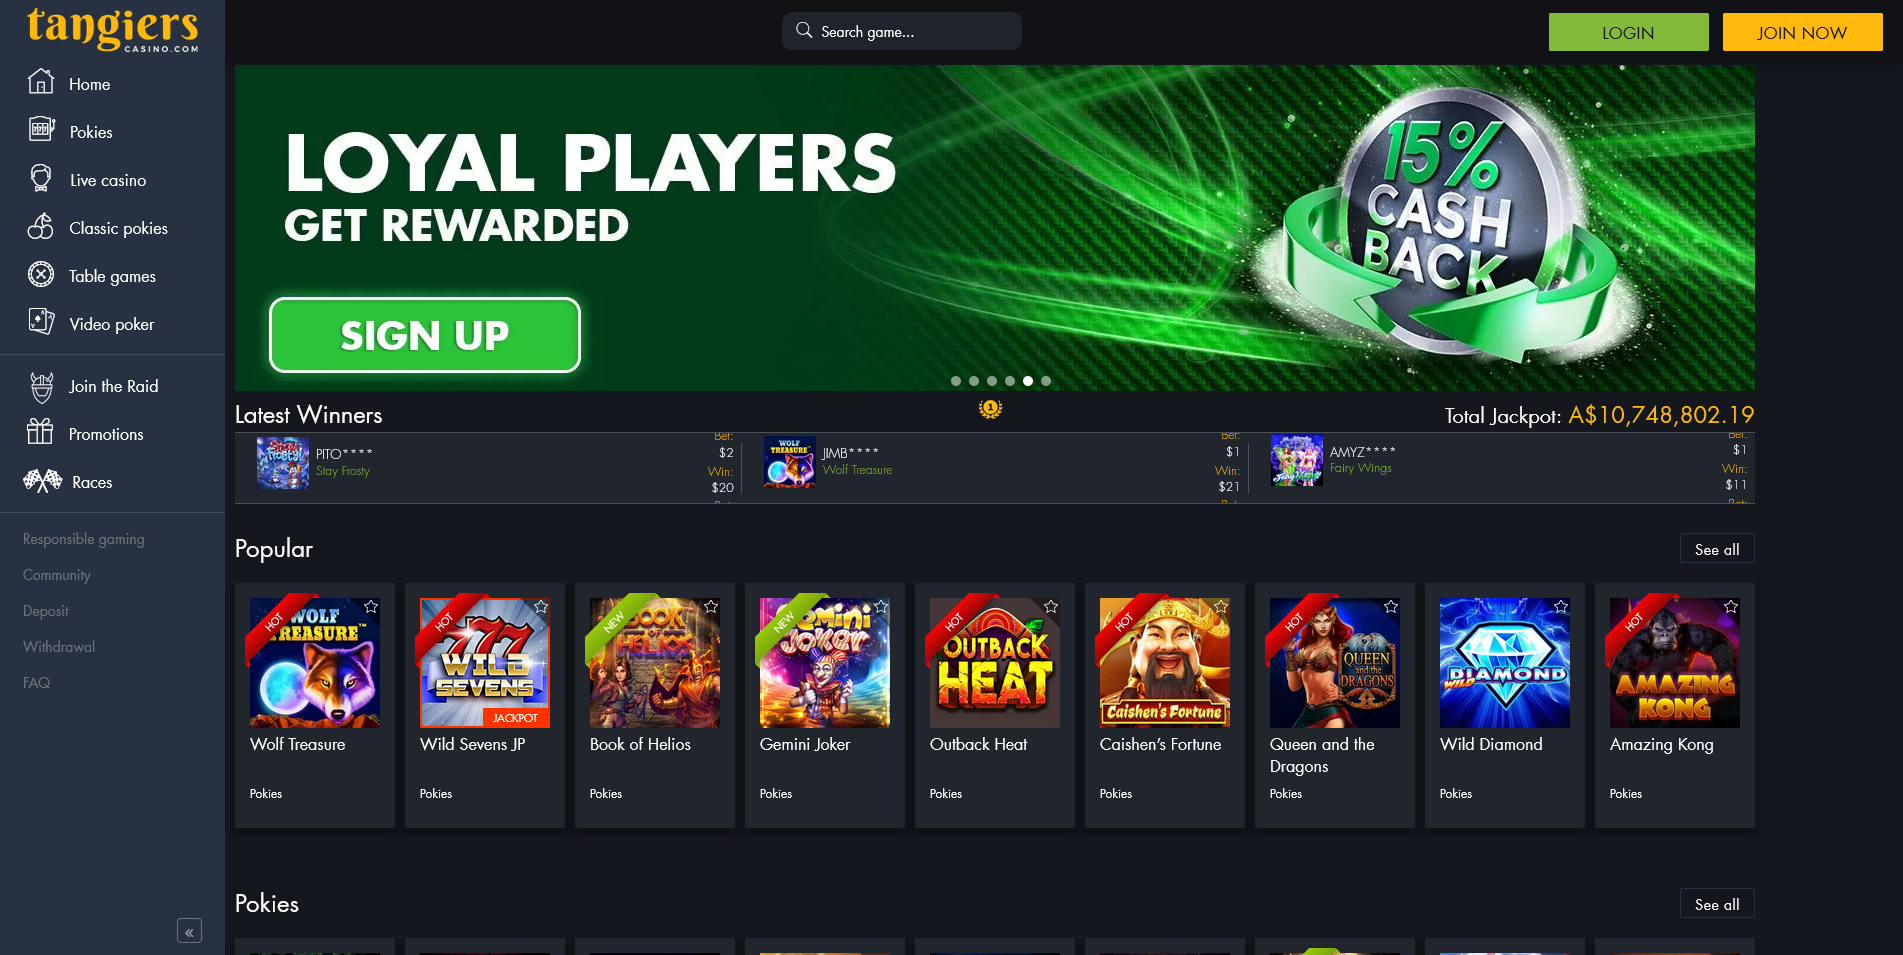 Screenshot of main Page on Tangiers Casino site